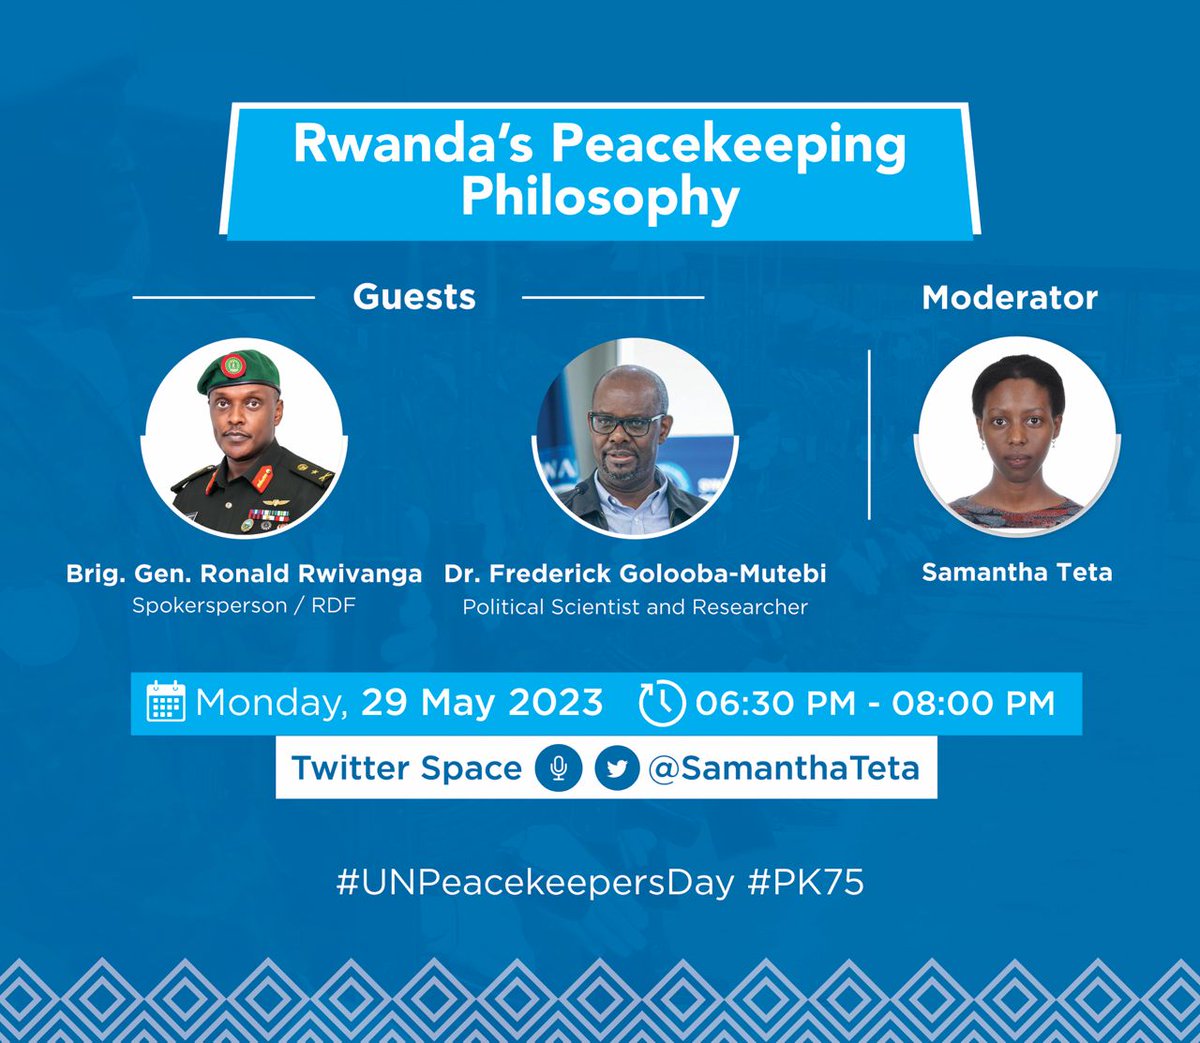 Rwanda has earned a reputation as a giant of peacekeeping for its efficiency, discipline & security ethos that prioritizes the vulnerable populations under its protection. On Intl #PeacekeepingDay, join this conversation on🇷🇼's peace operations principles. twitter.com/i/spaces/1nAKE…